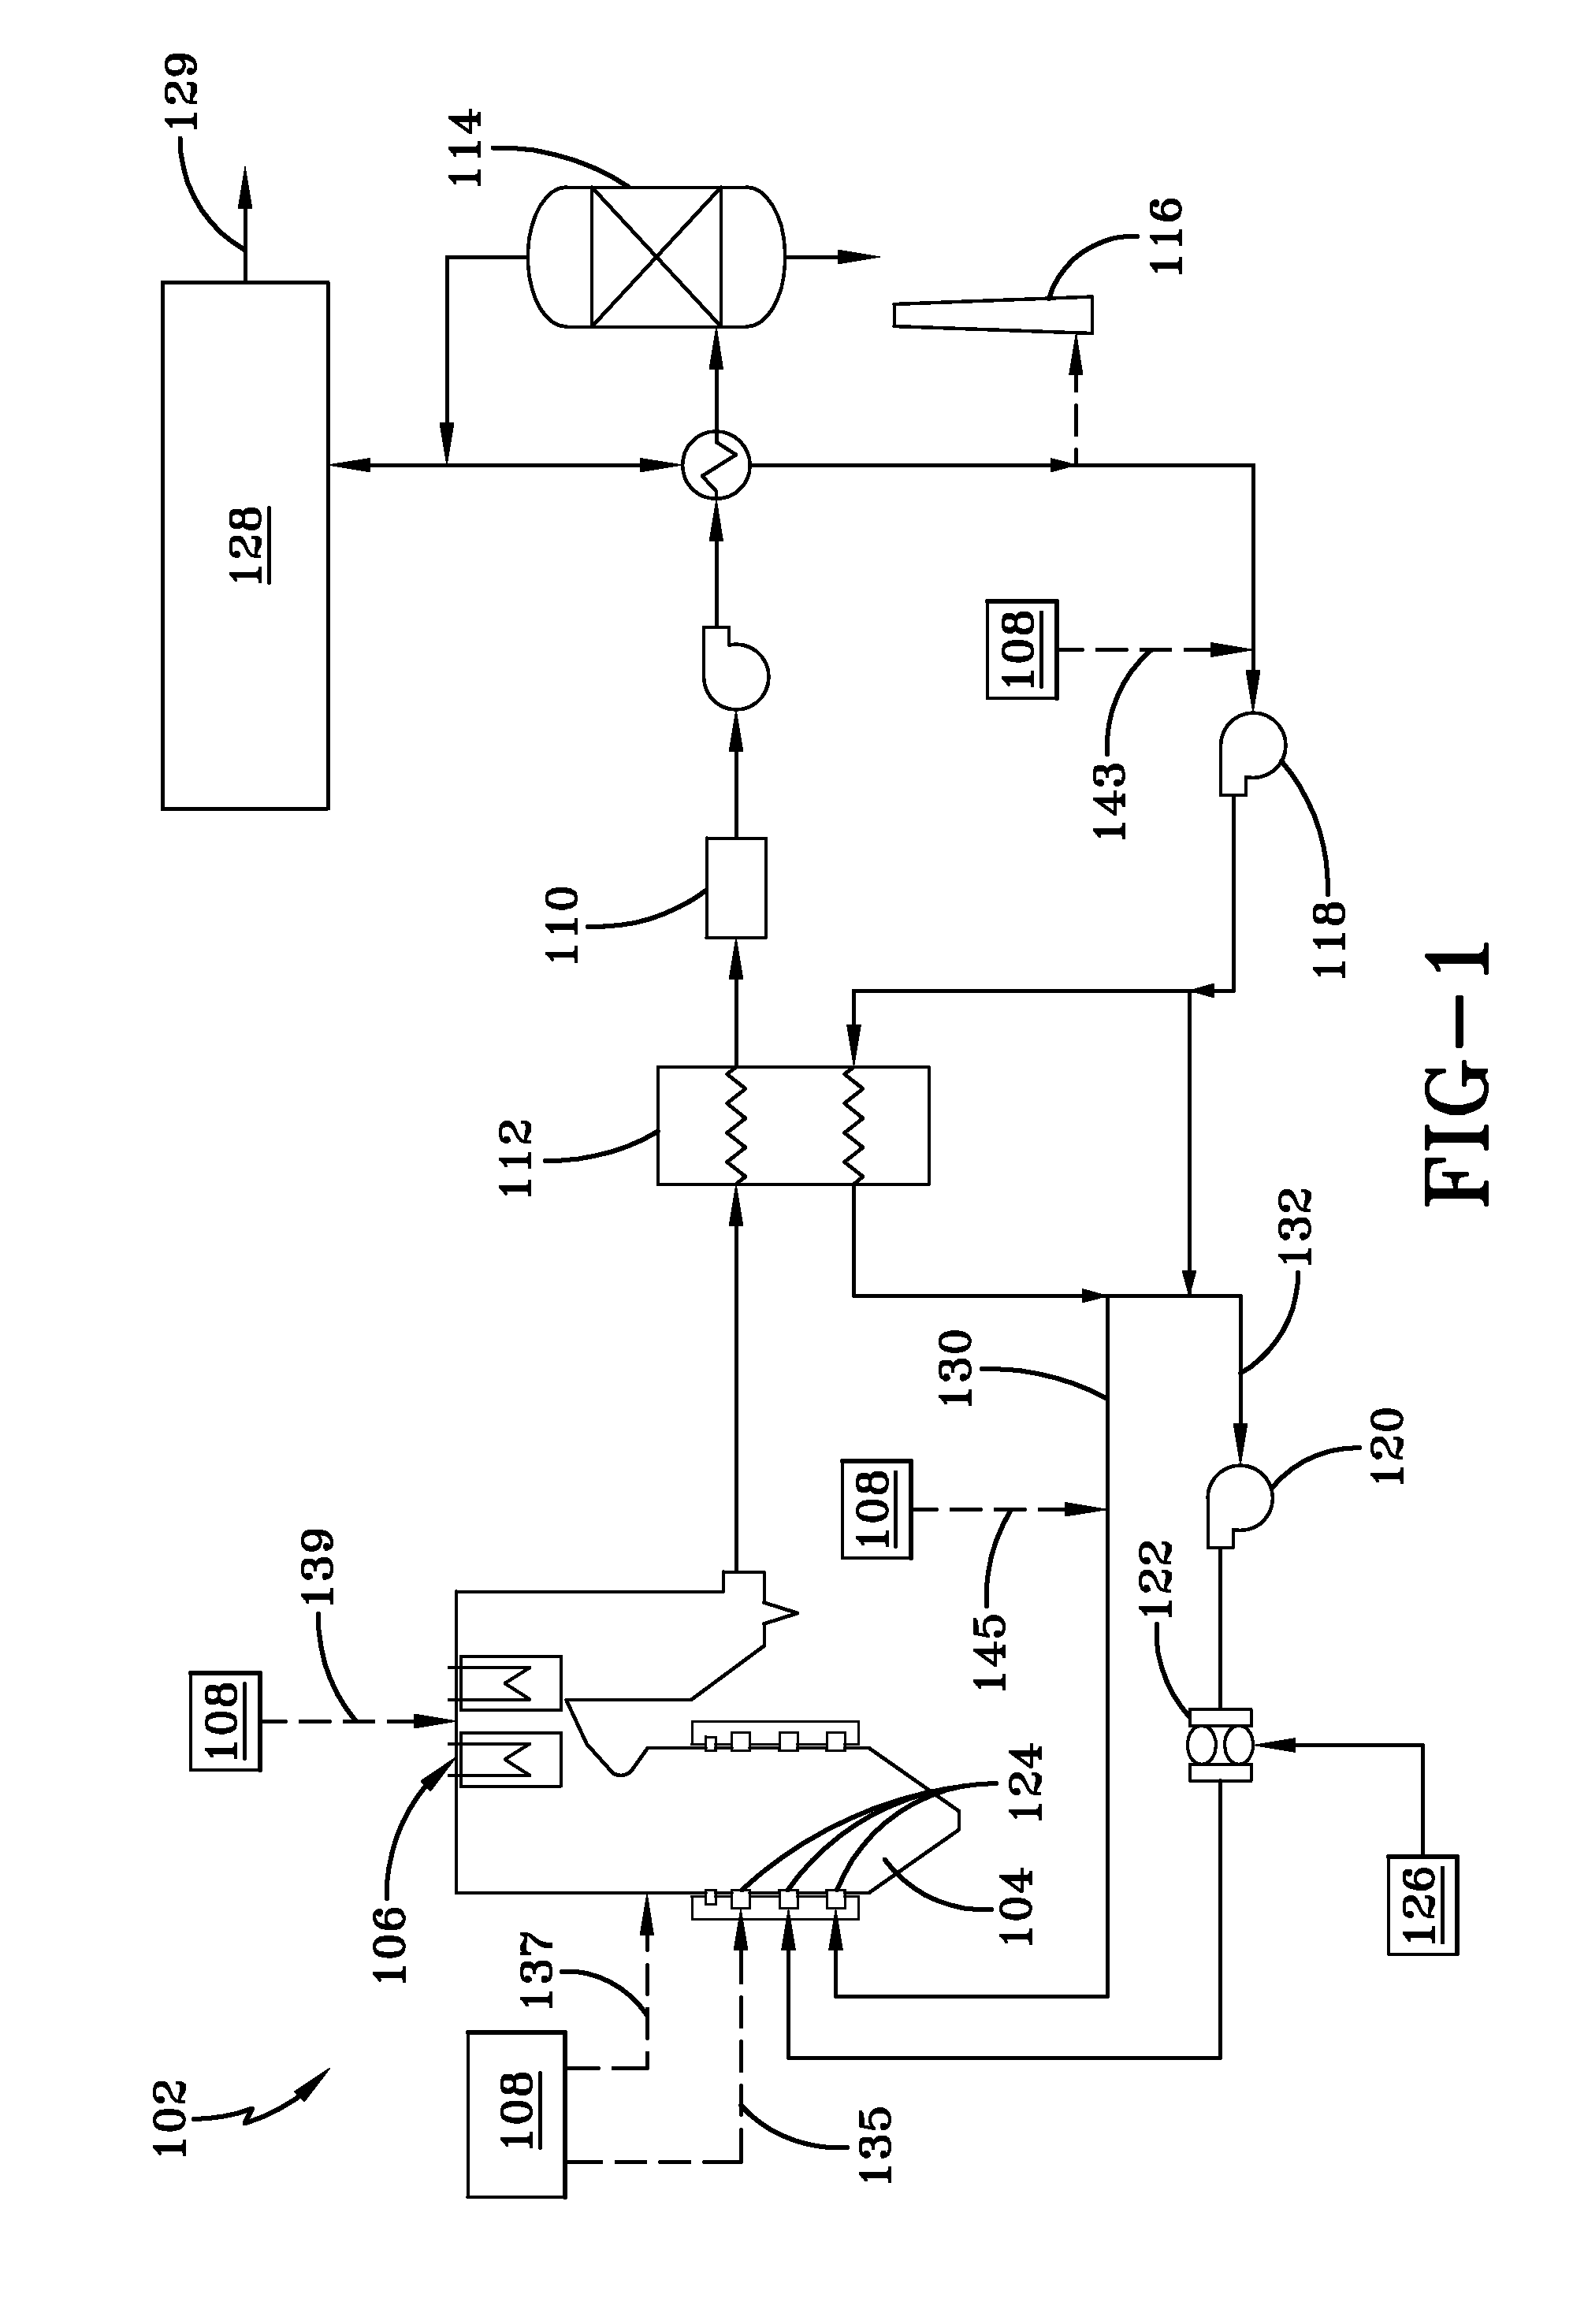 Combustion system with steam or water injection